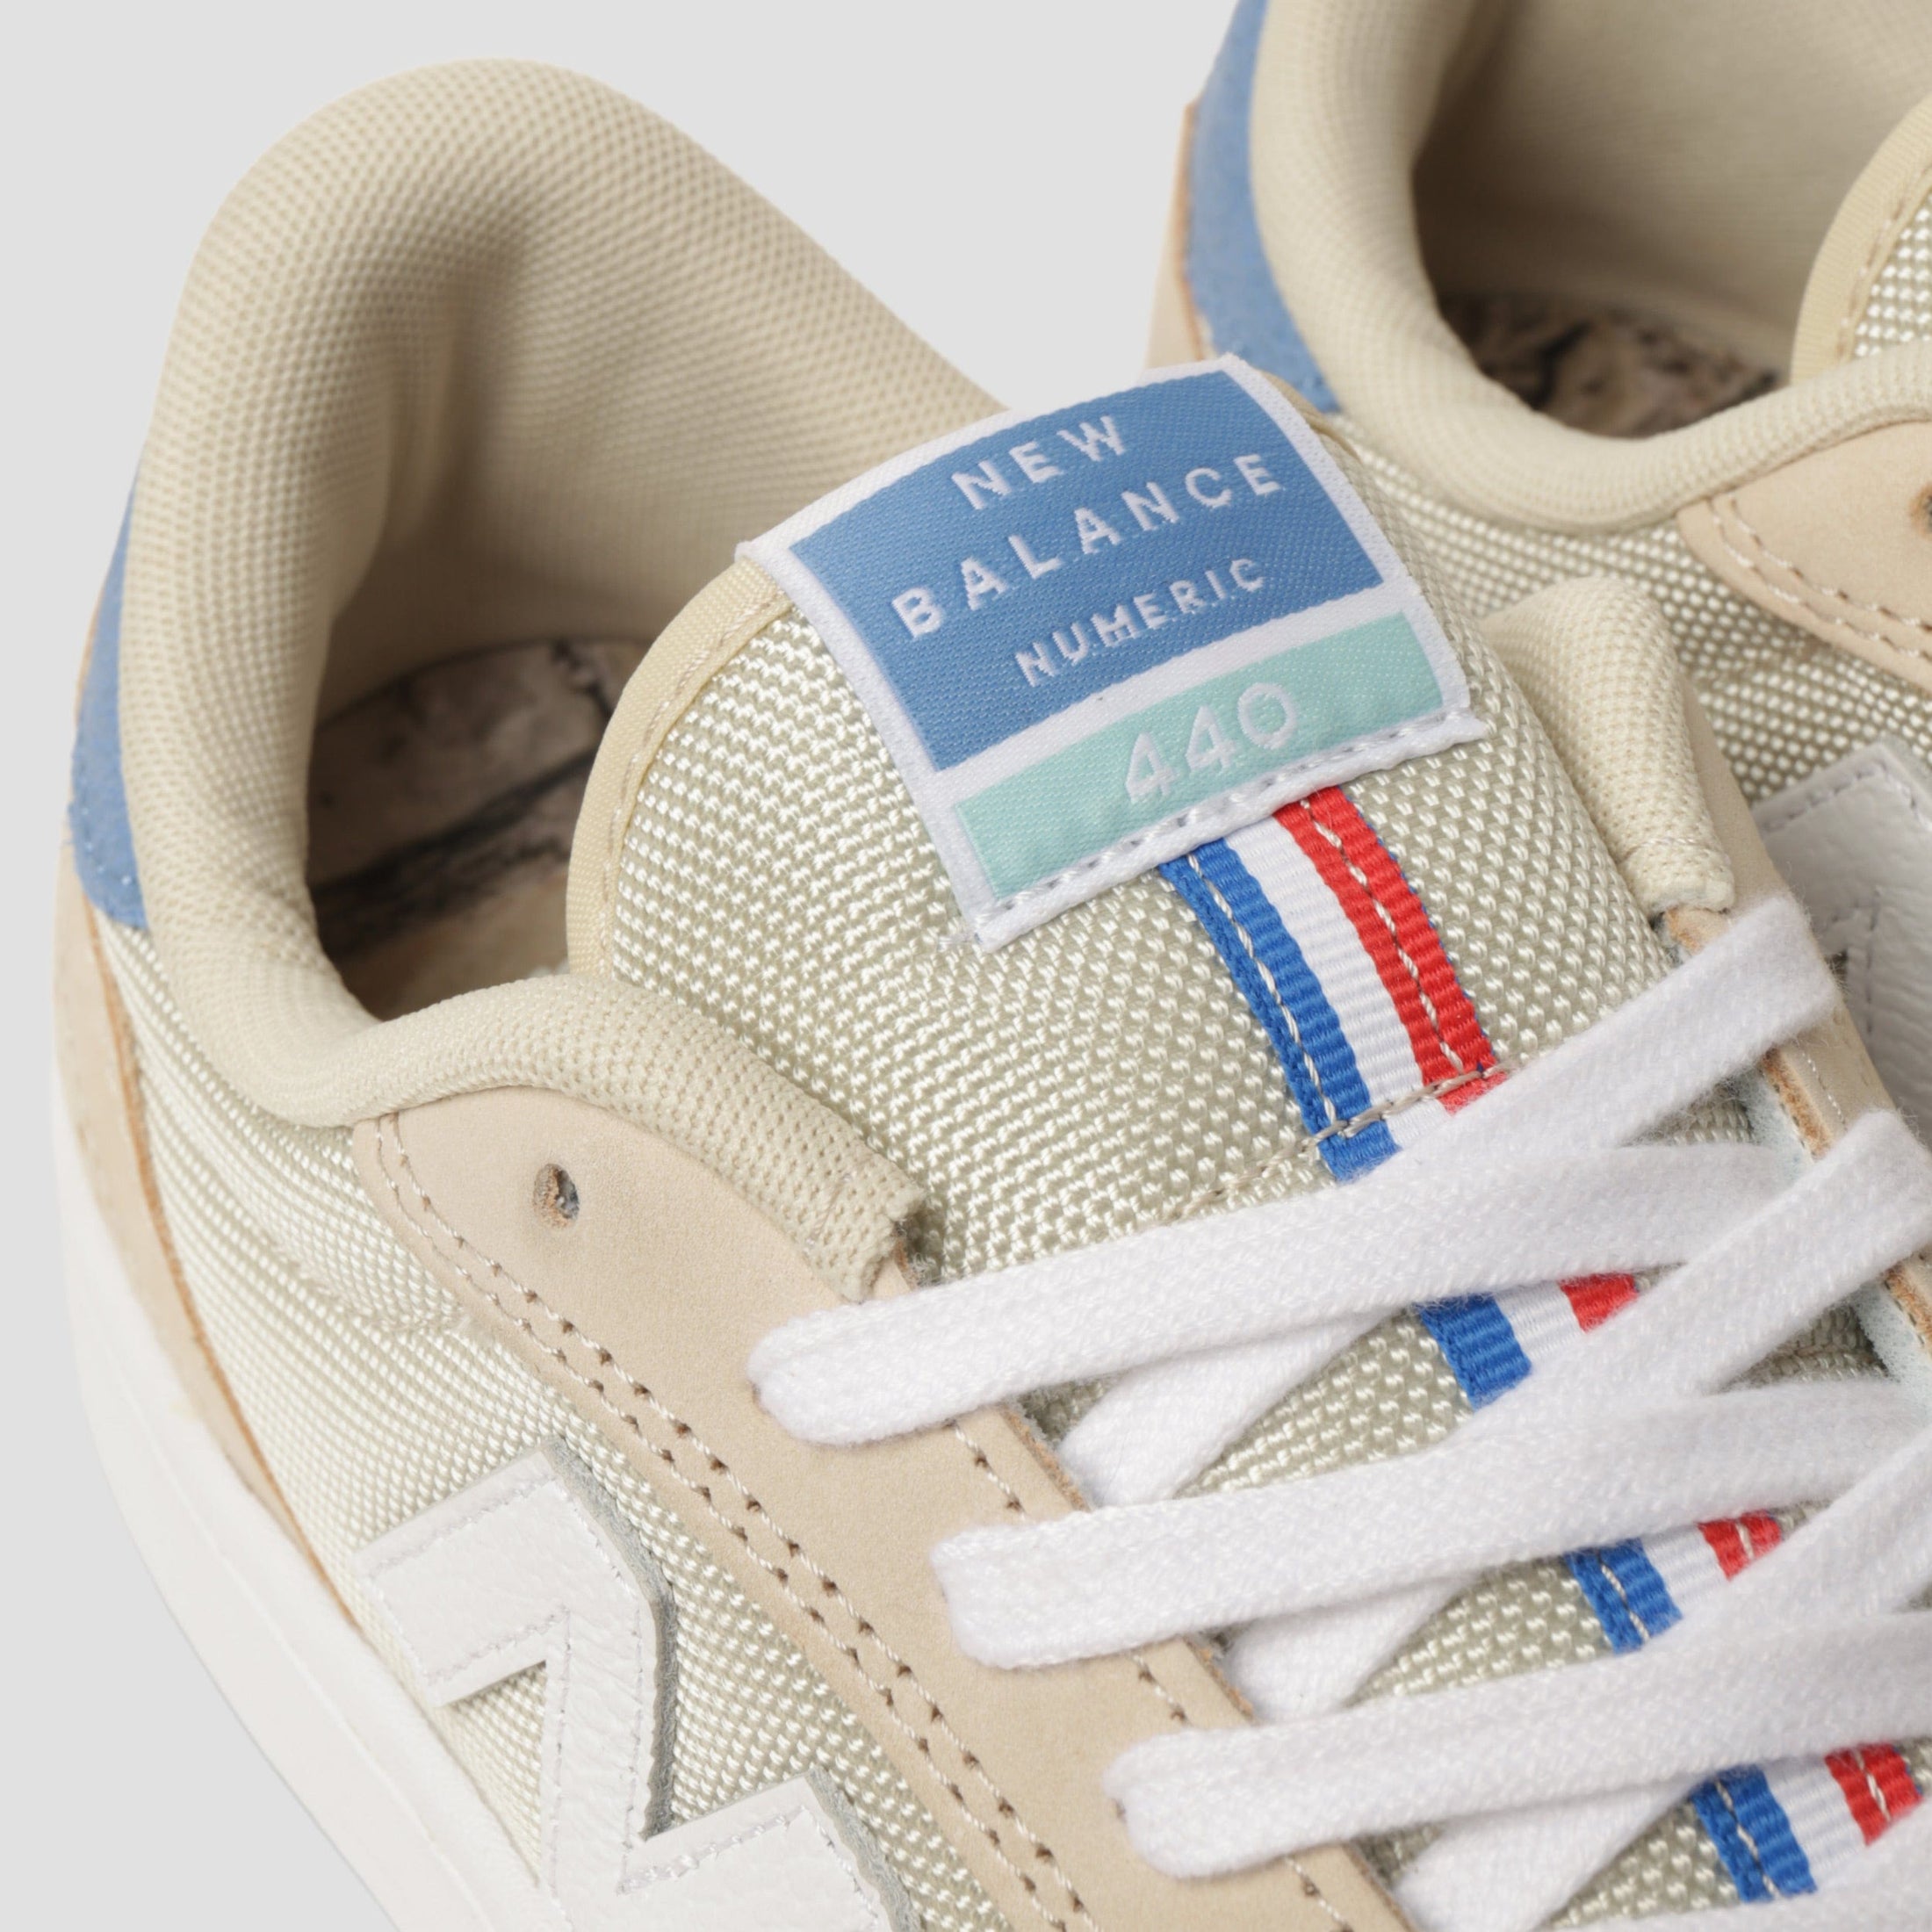 New Balance x Welcome 440 Skate Shoes Tan / White